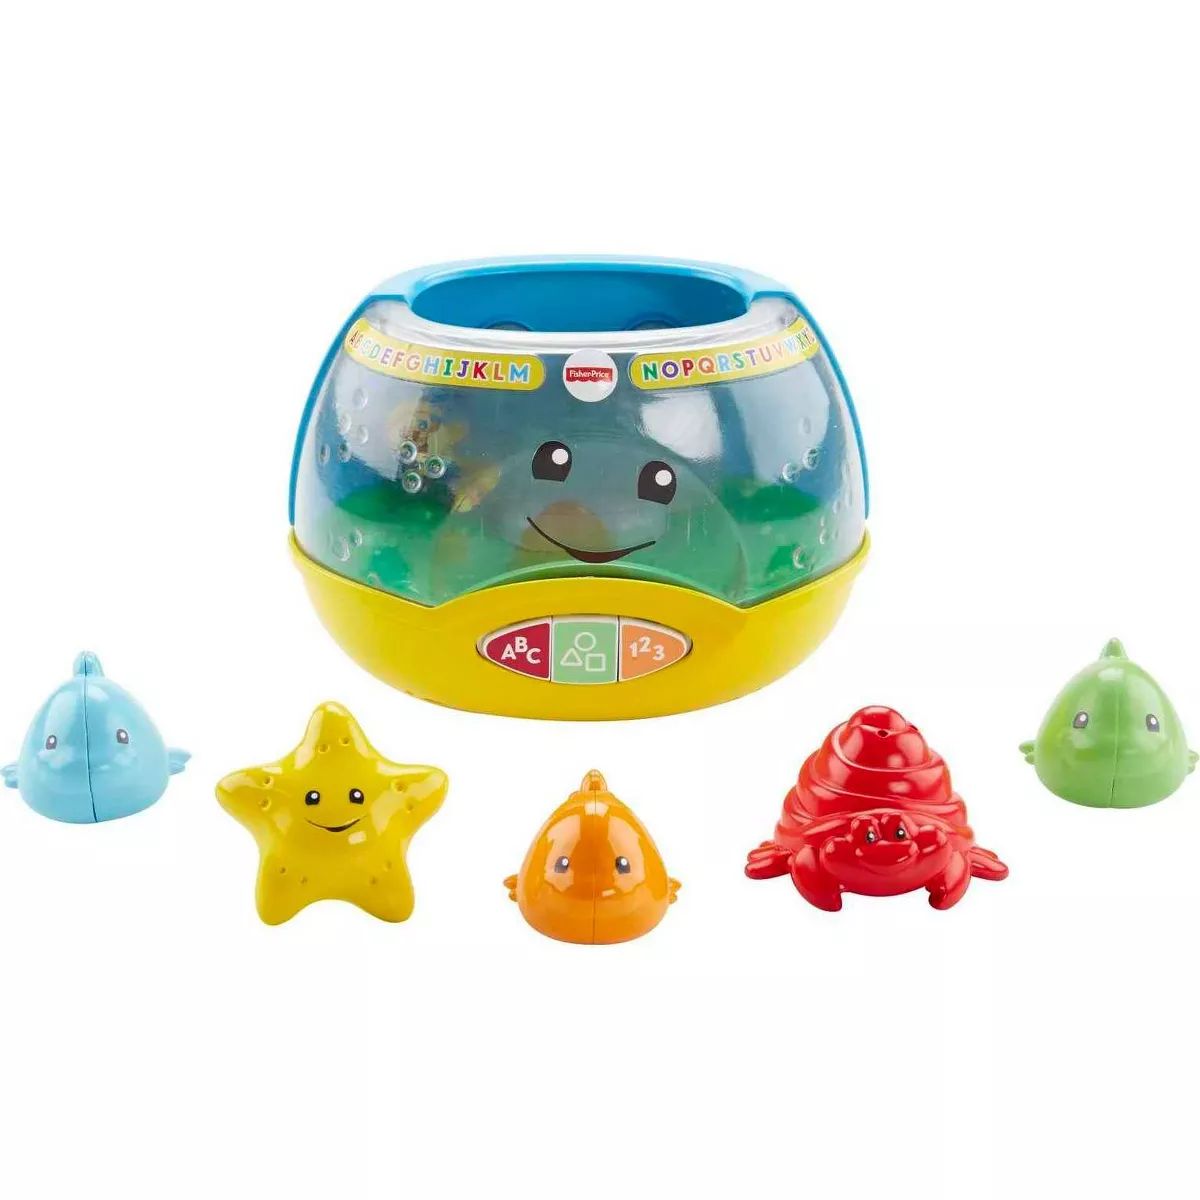 Fisher-Price Laugh and Learn Magical Lights Fishbowl | Target